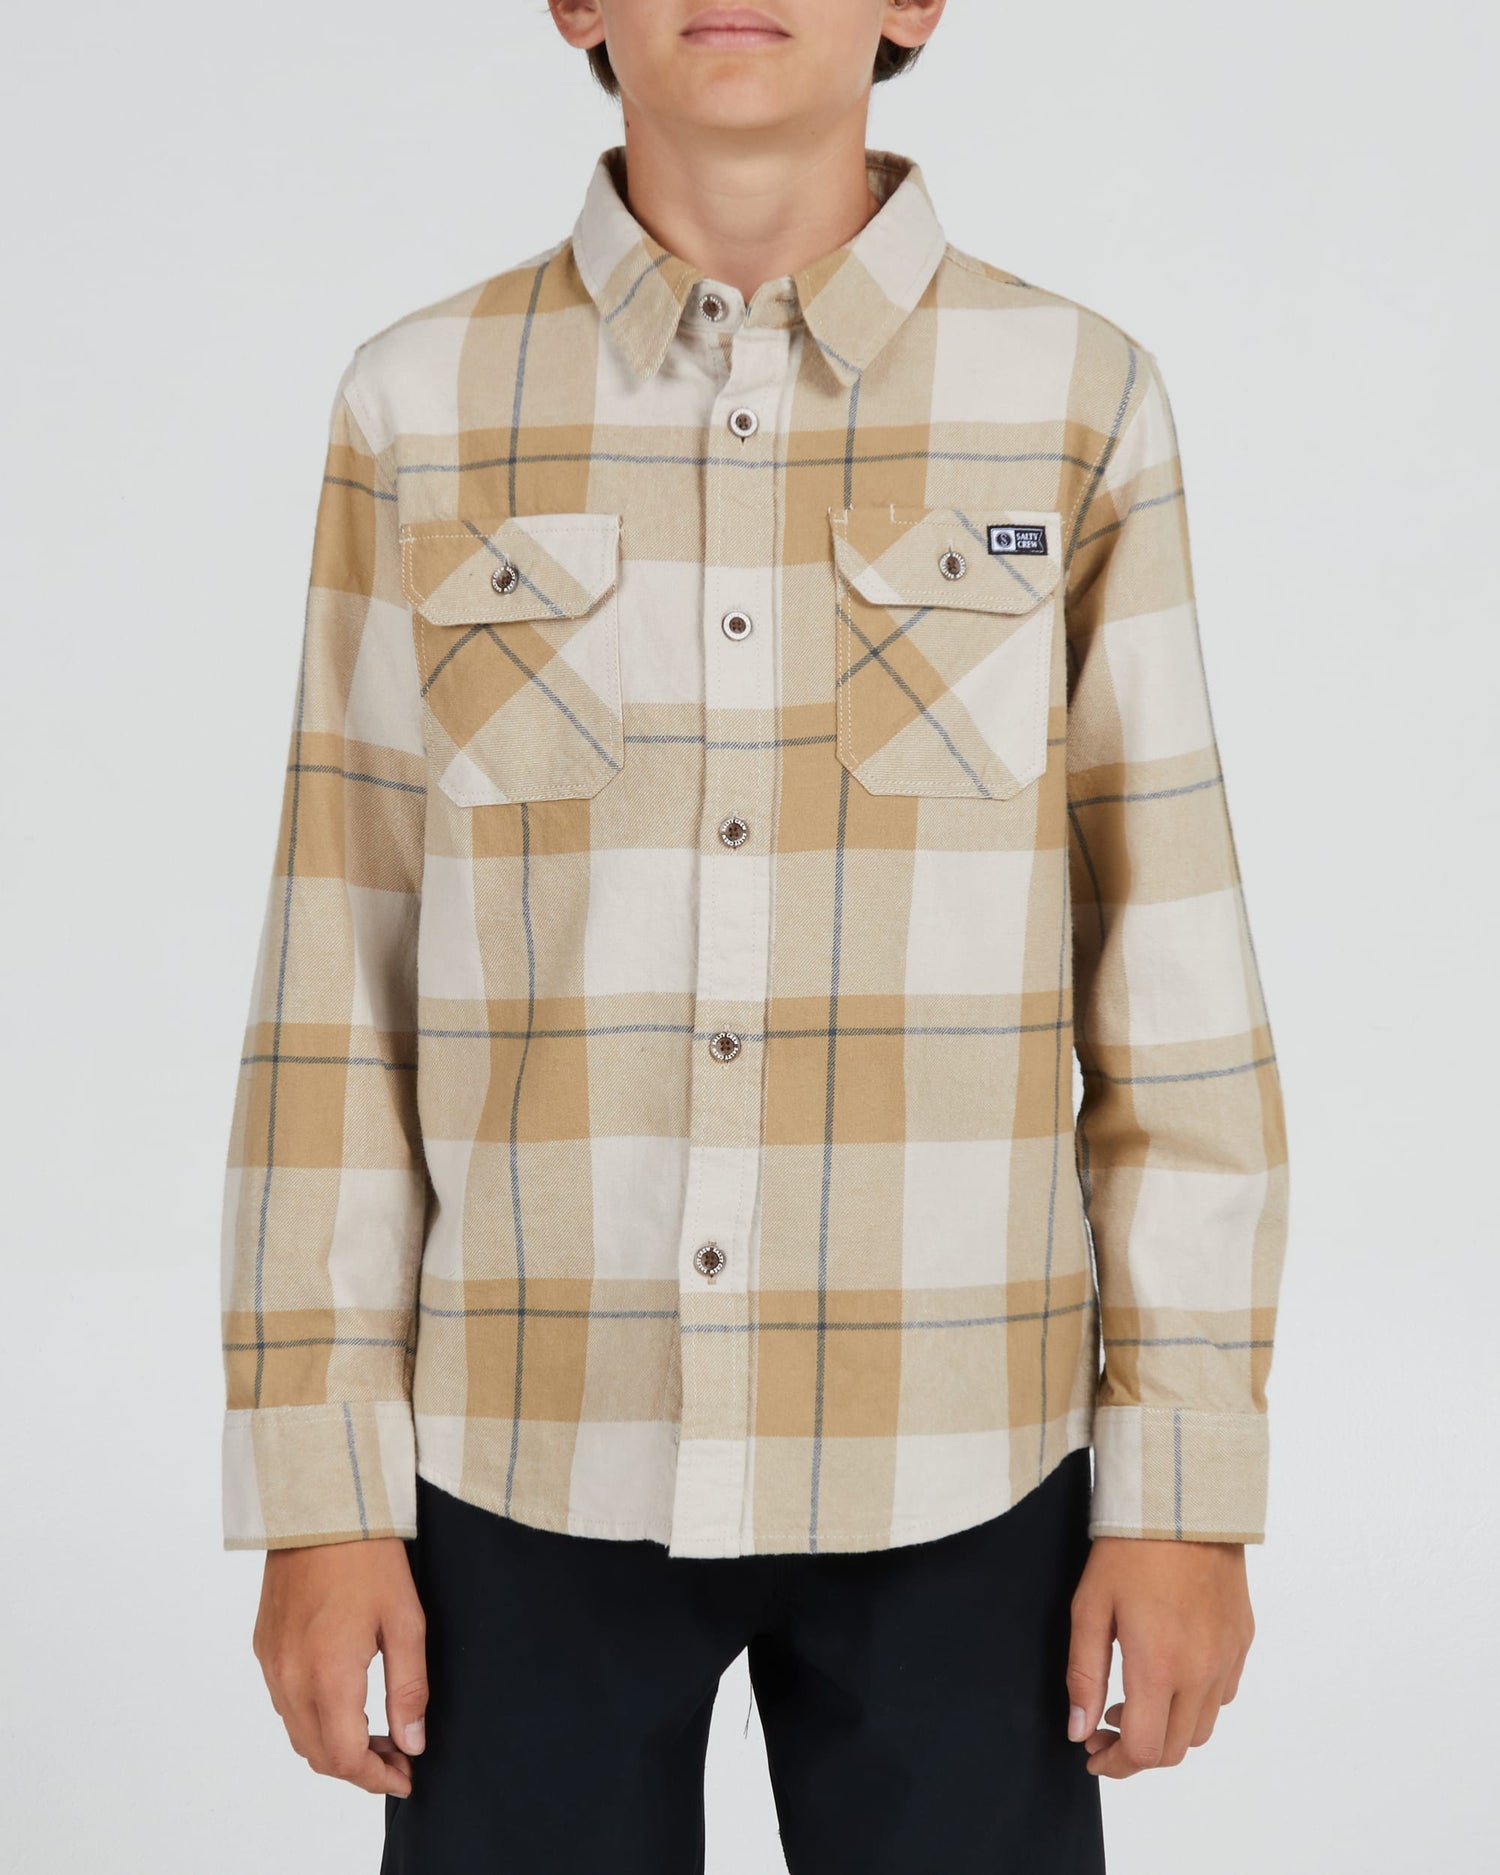 Salty crew WOVEN SHIRTS FIRST LIGHT BOYS L/S FLANNEL - Peyote in Peyote